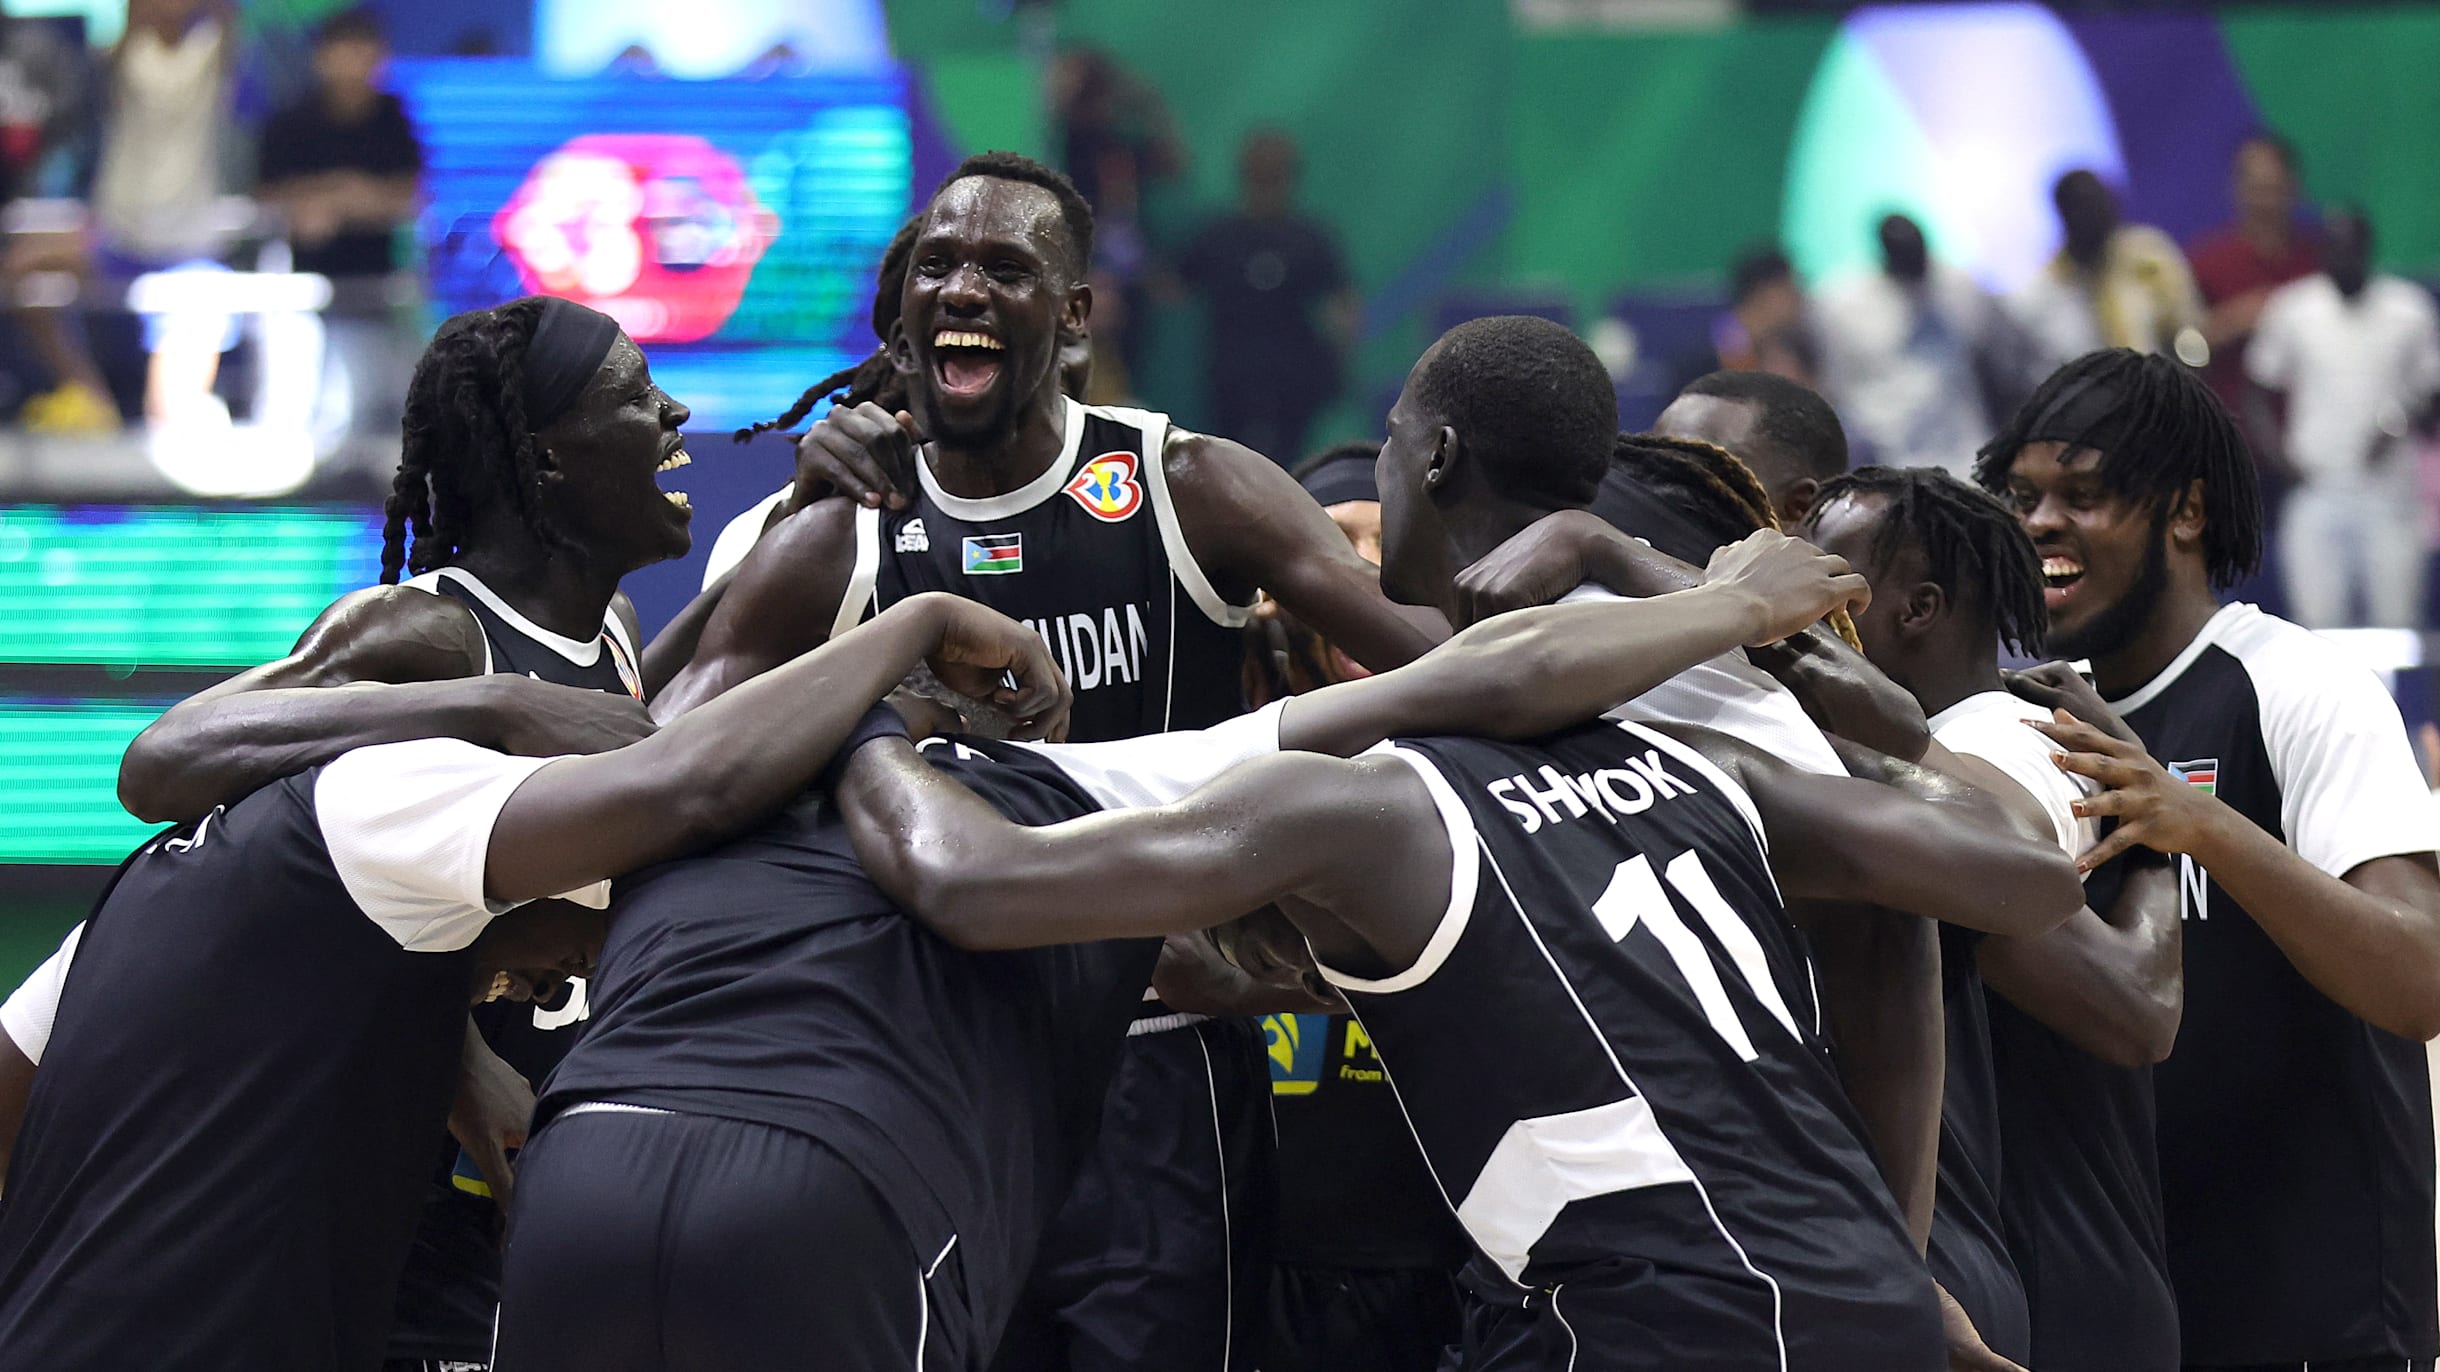 Basketball World Cup 2023: Former NBA star Luol Deng credited with